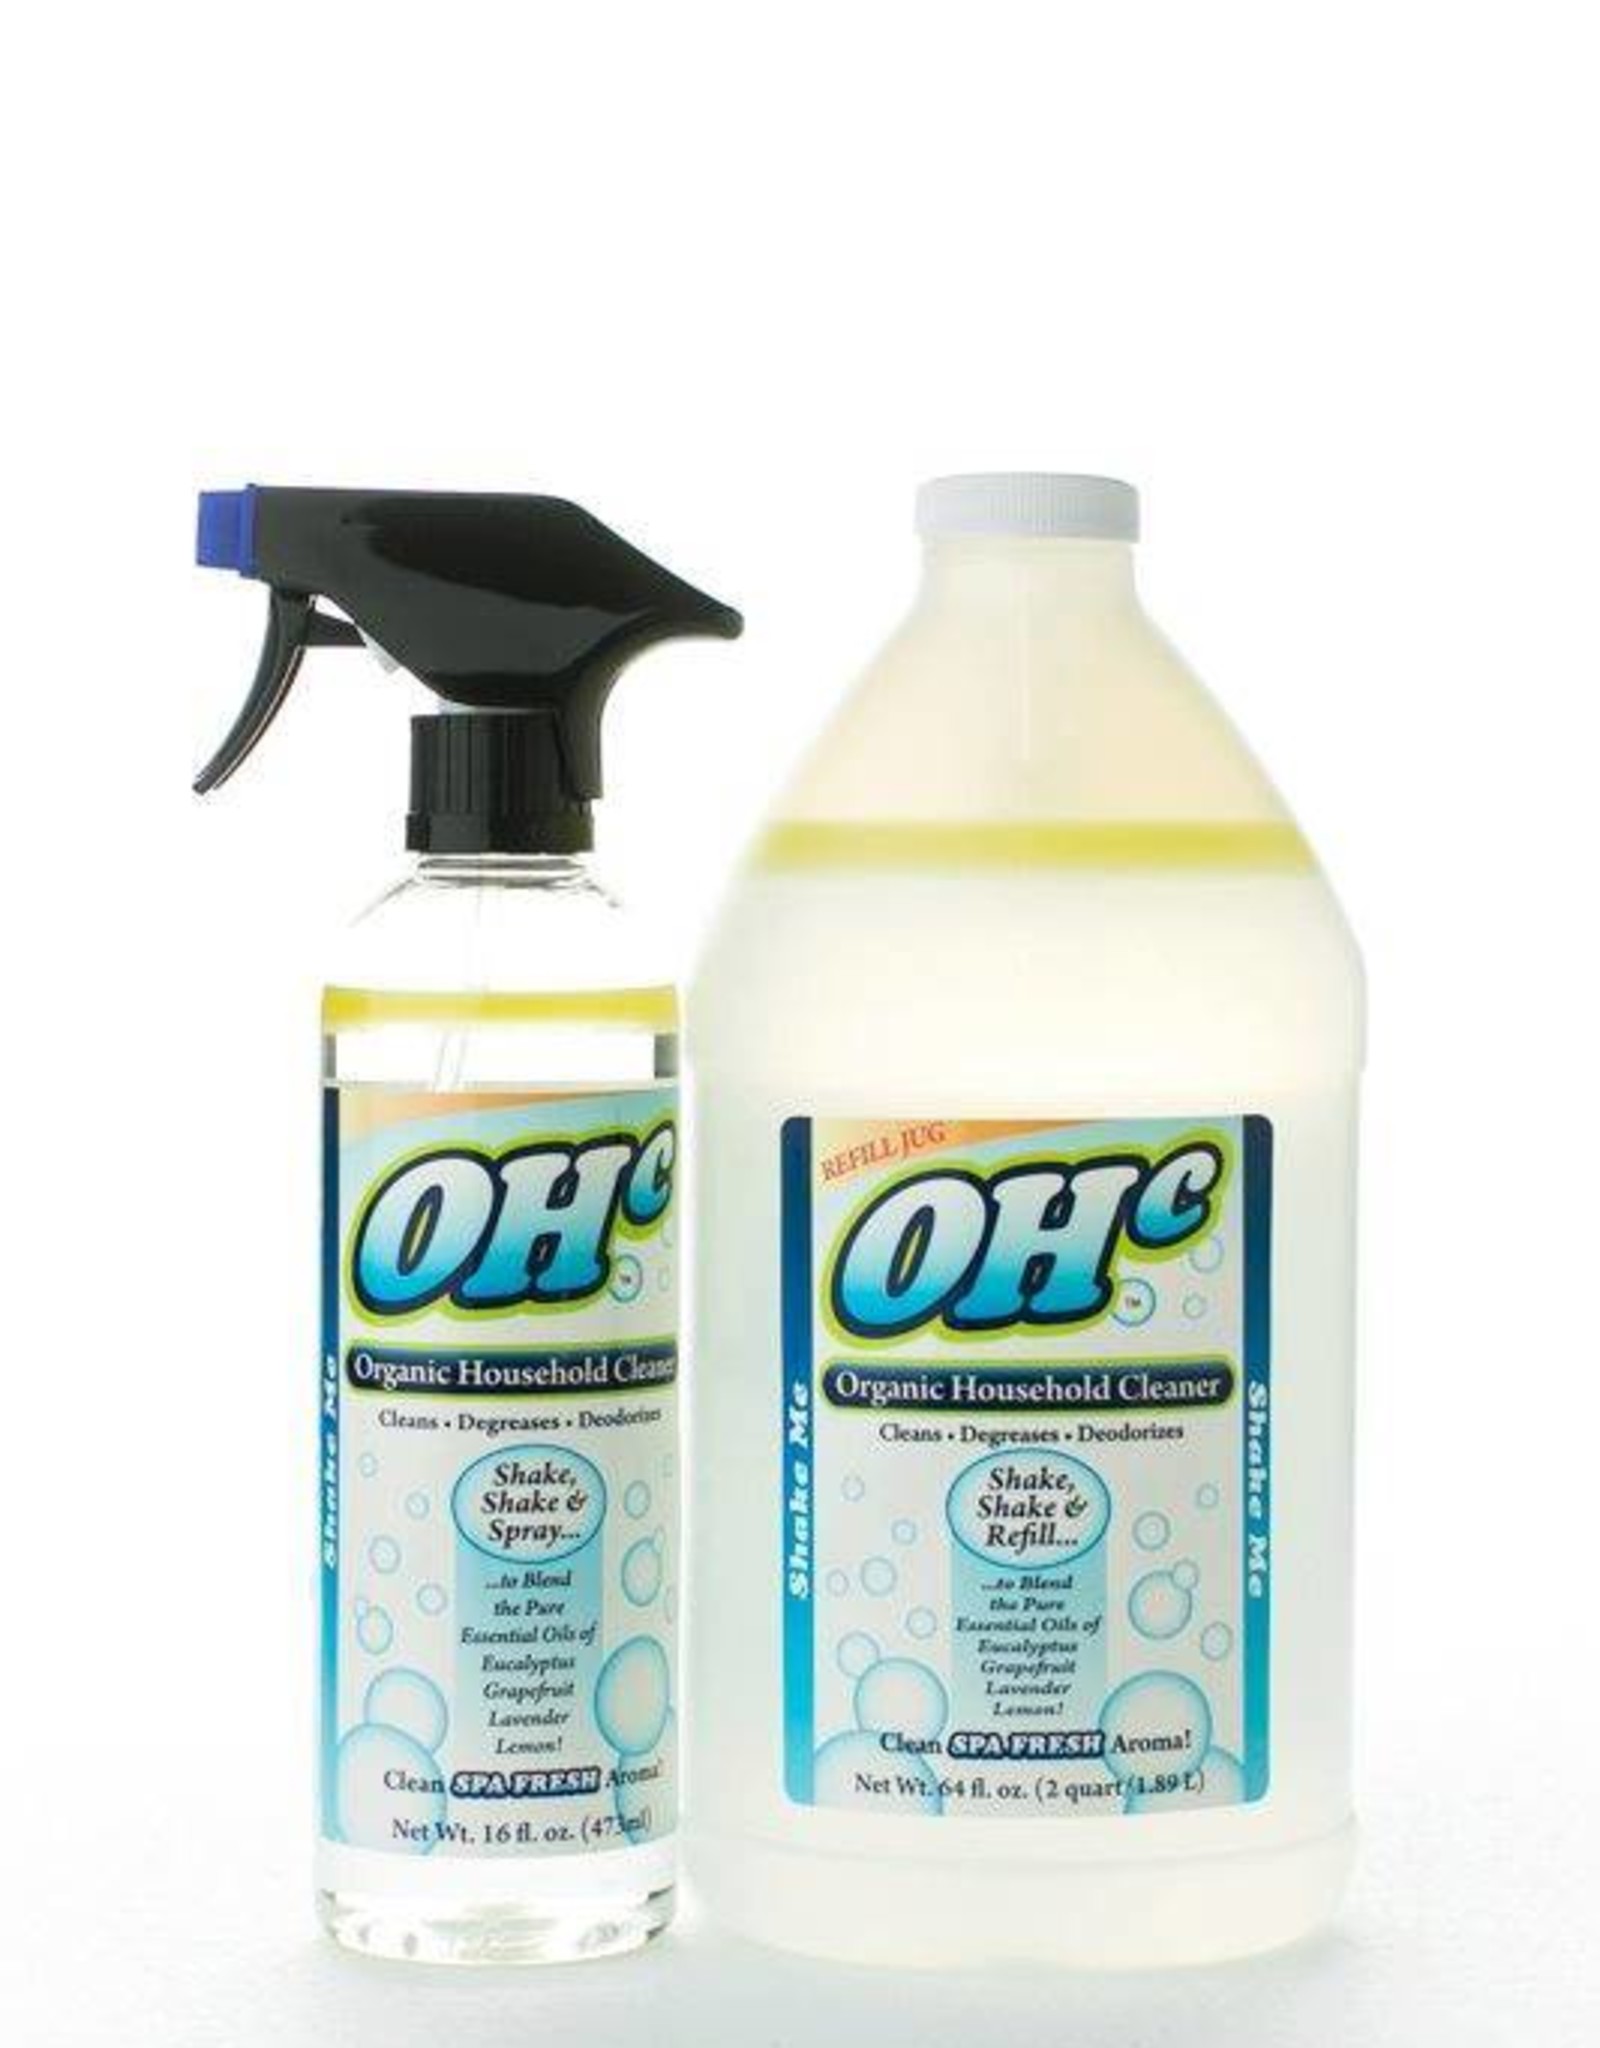 OHc (Organic Household Cleaner)